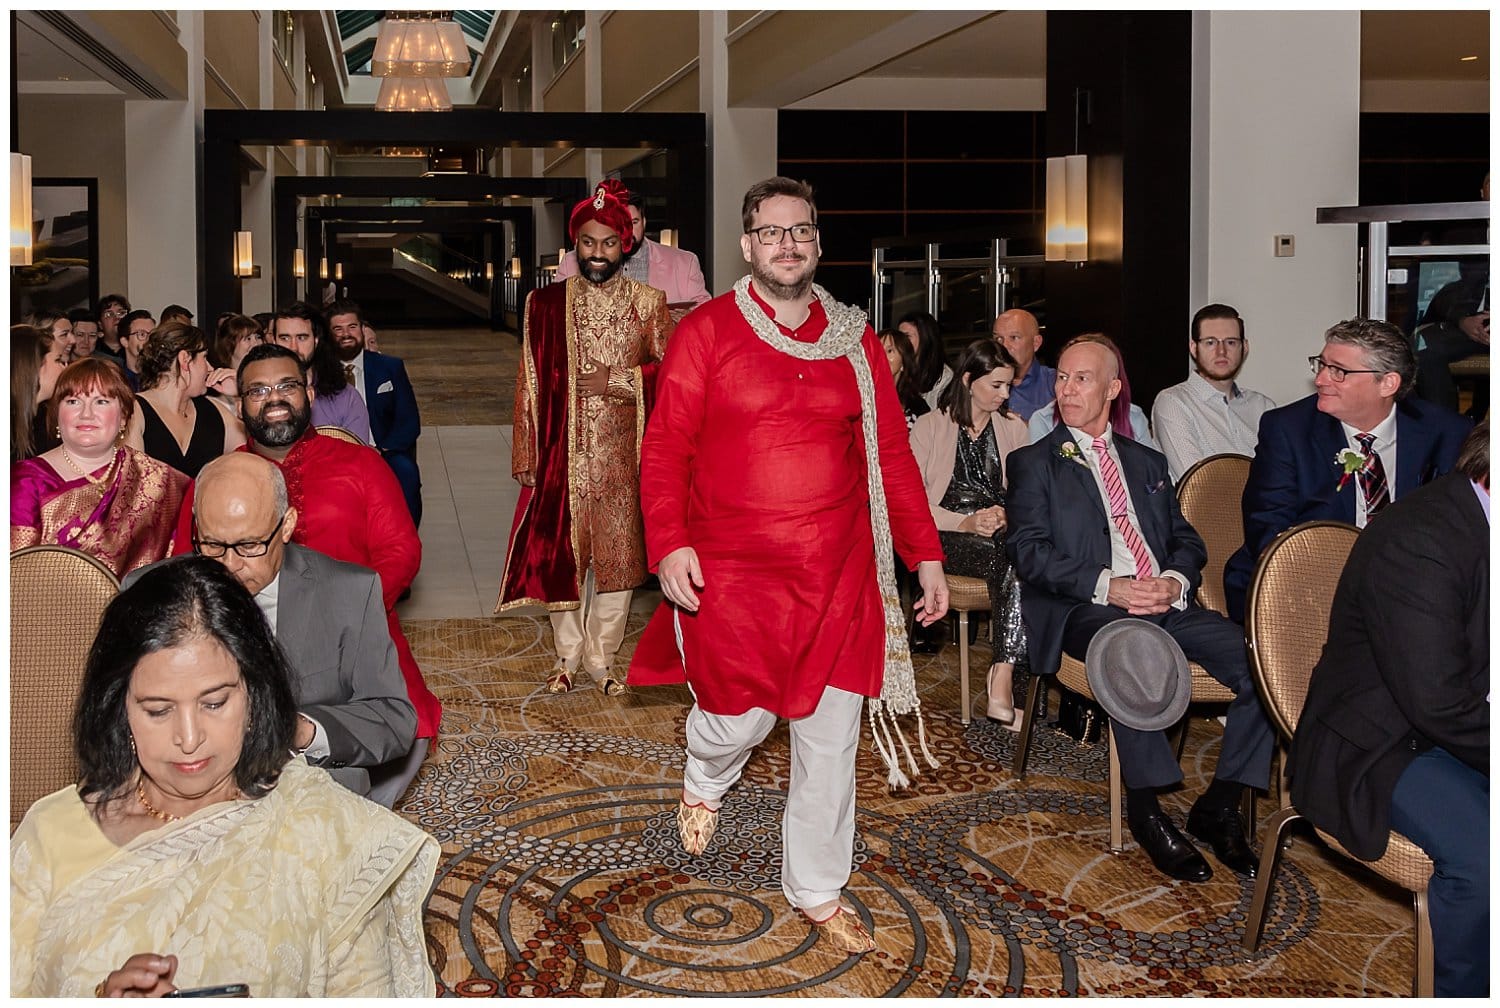 The groom walks up the aisle to stand by the officiant during his wedding ceremony at the Halifax Marriott Harbourfront Hotel.